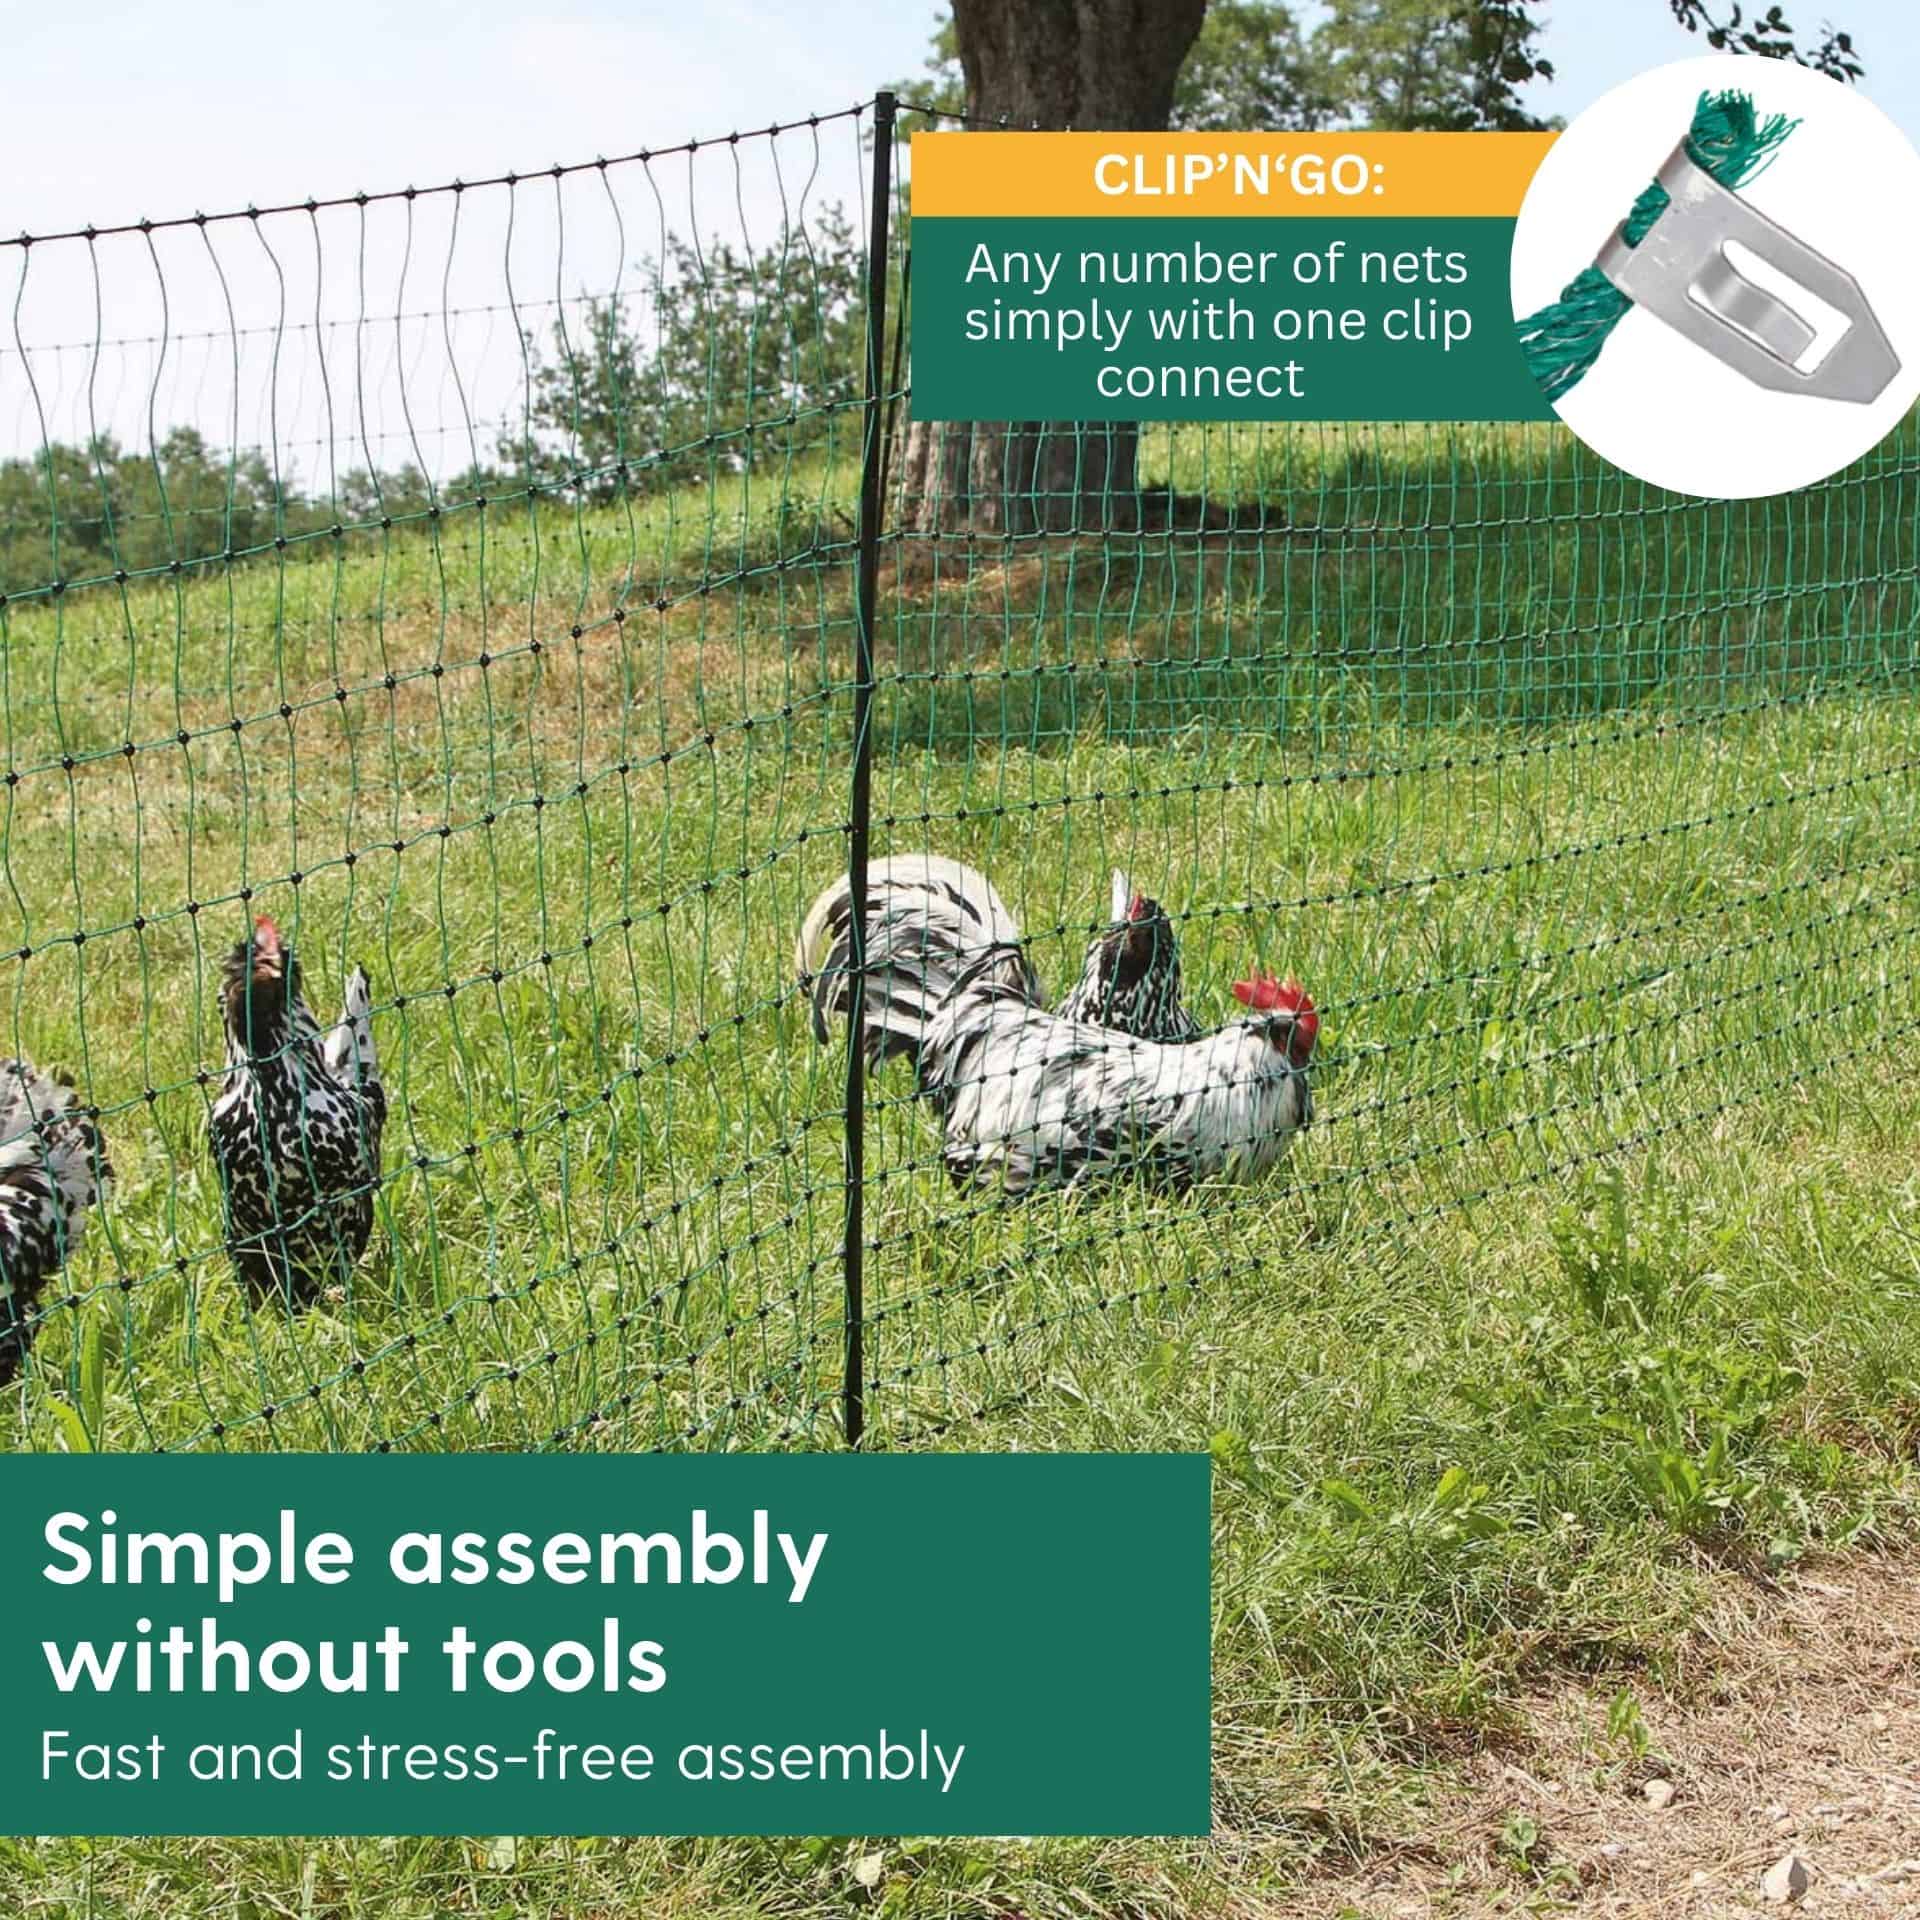 Agrarzone Poultry Net Classic electrificable, double tip, green 25 m x 112 cm